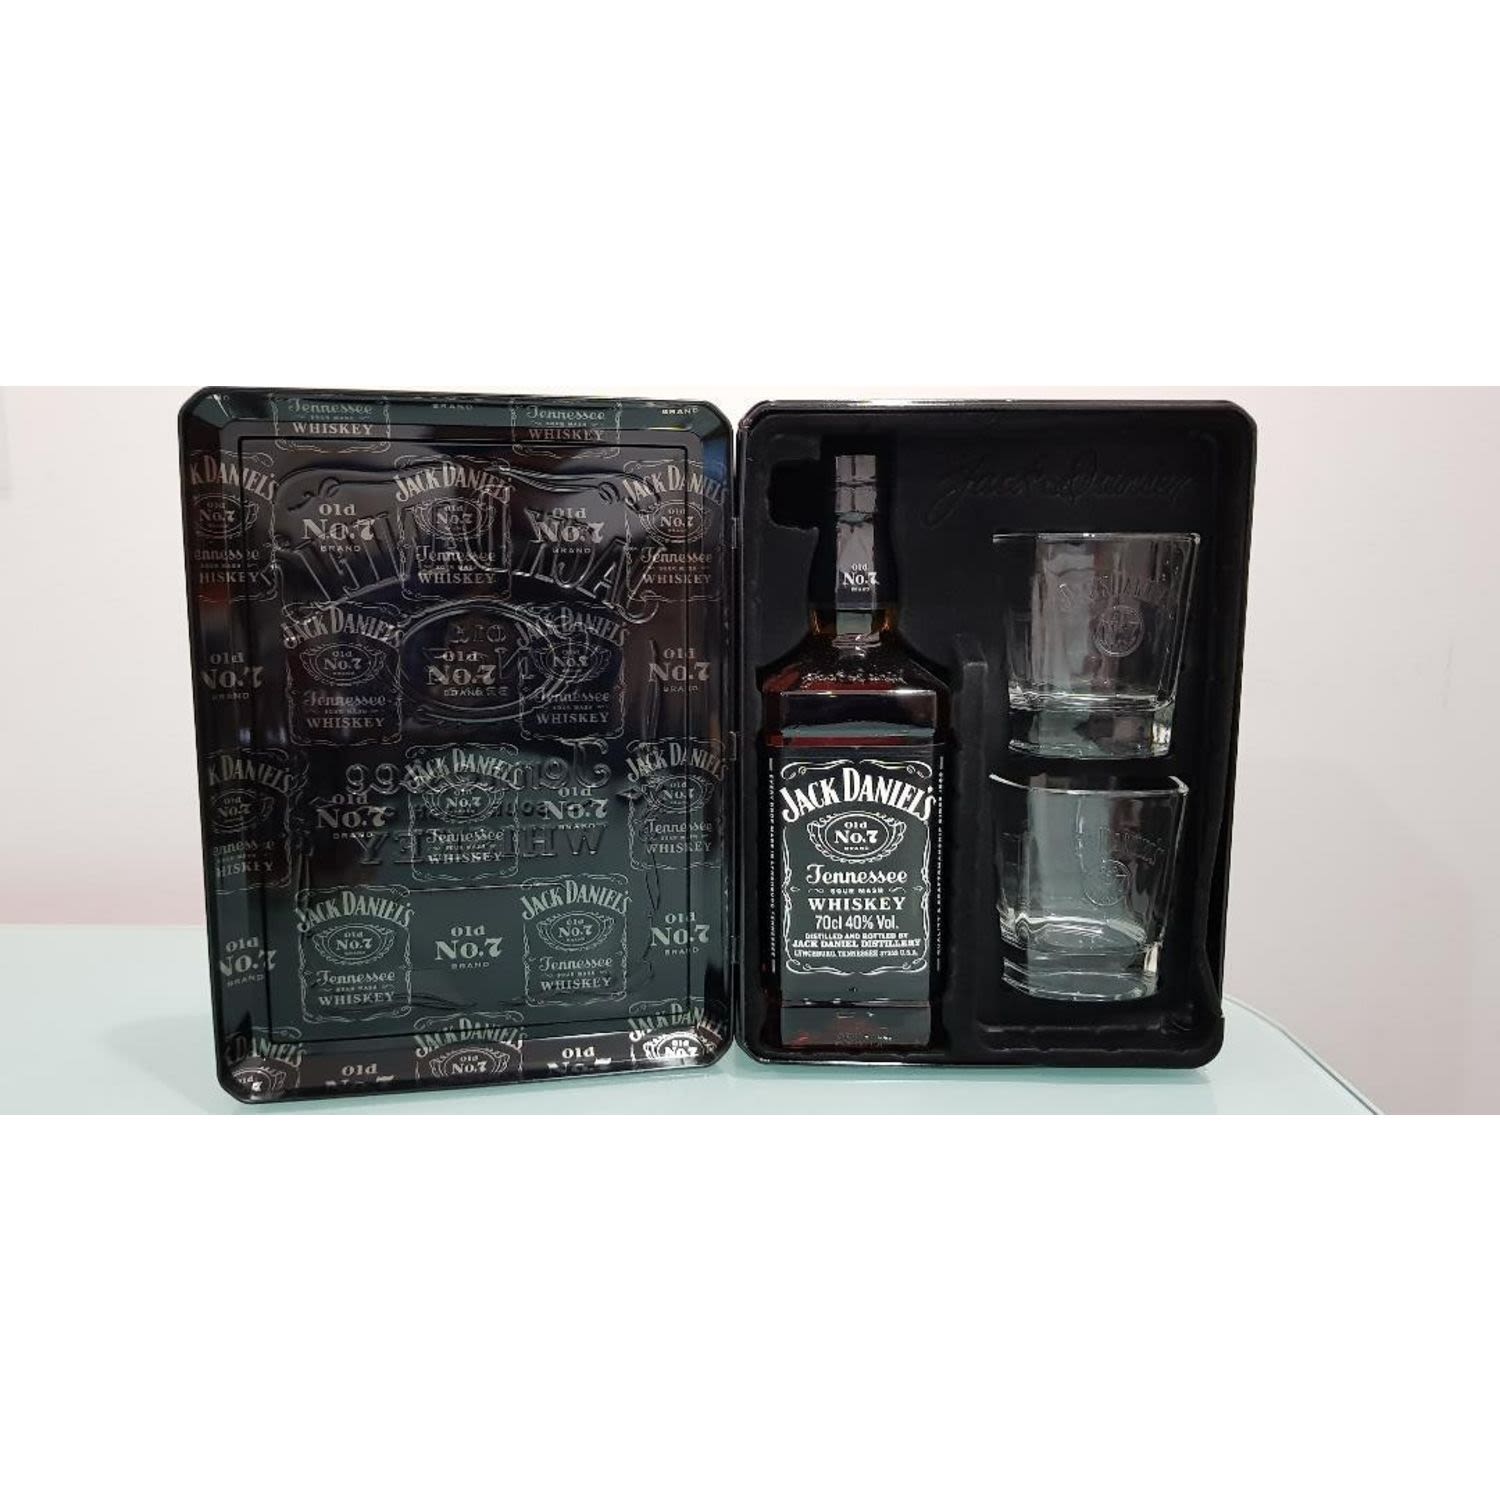 Jack Daniel's Old No. 7 Tennessee Whiskey + 2 Glasses in Gift Tin 700mL Bottle